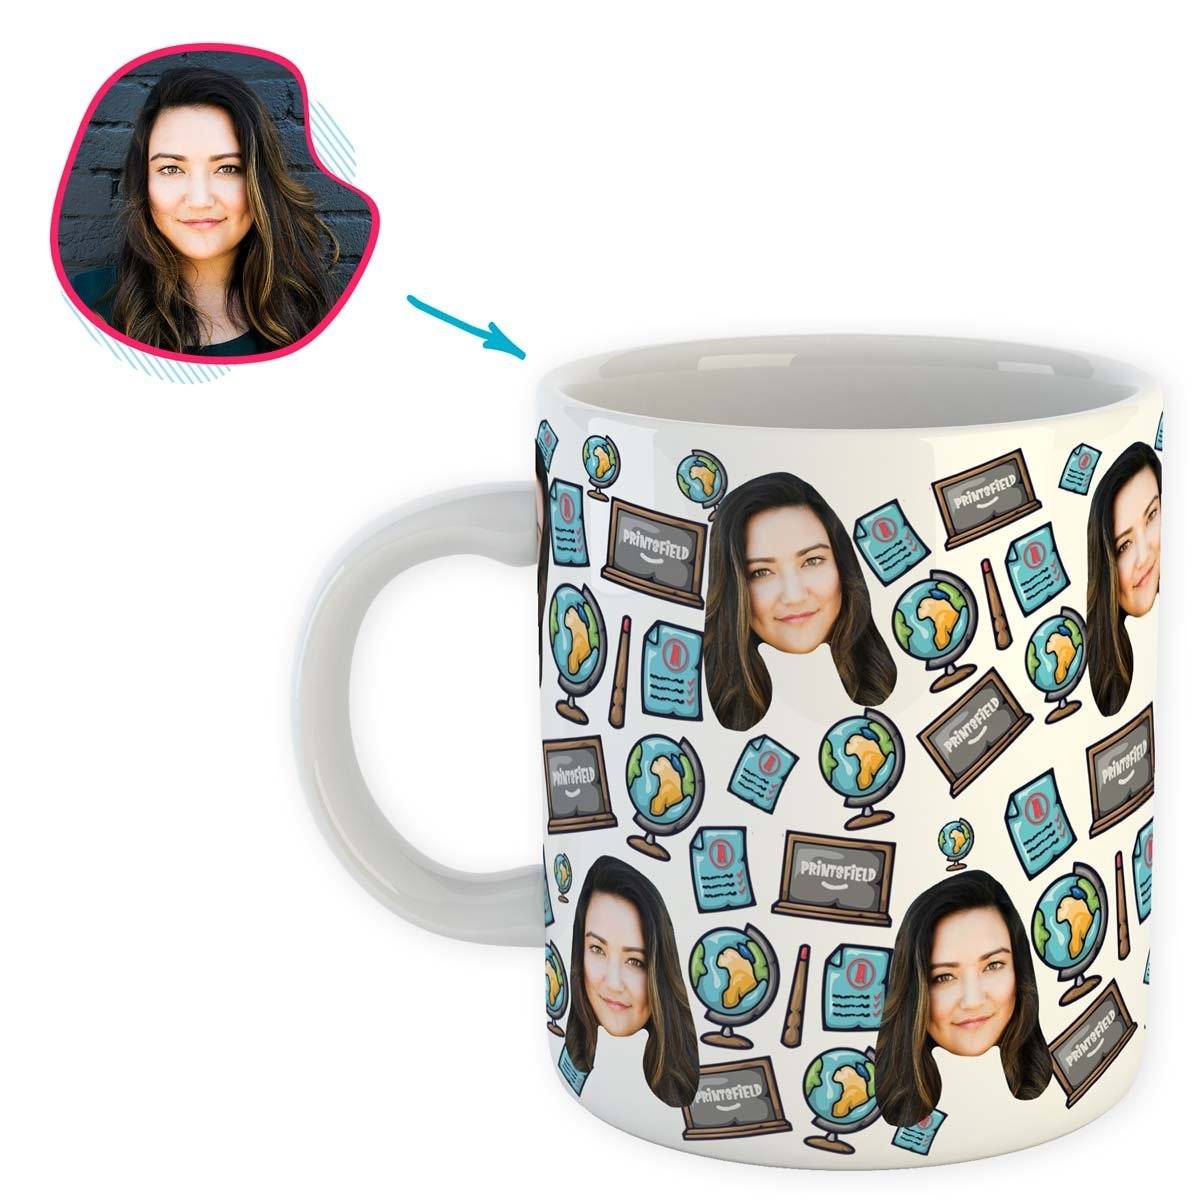 White Teacher personalized mug with photo of face printed on it